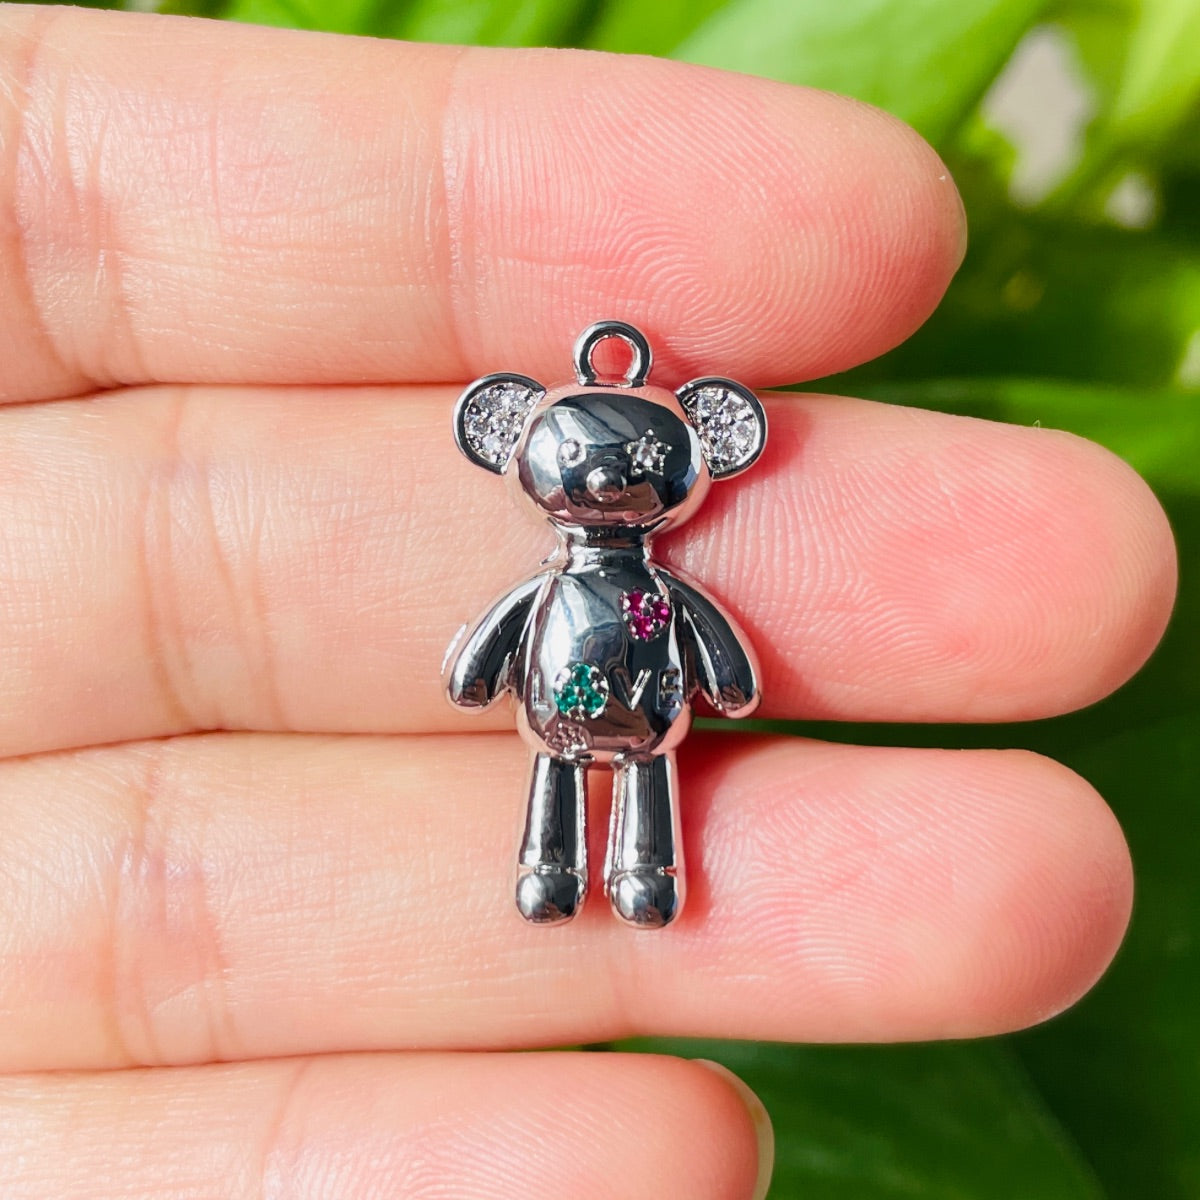 5-10pcs/lot 27 *15mm CZ Paved Cute Bear Charms CZ Paved Charms Animals & Insects Charms Beads Beyond